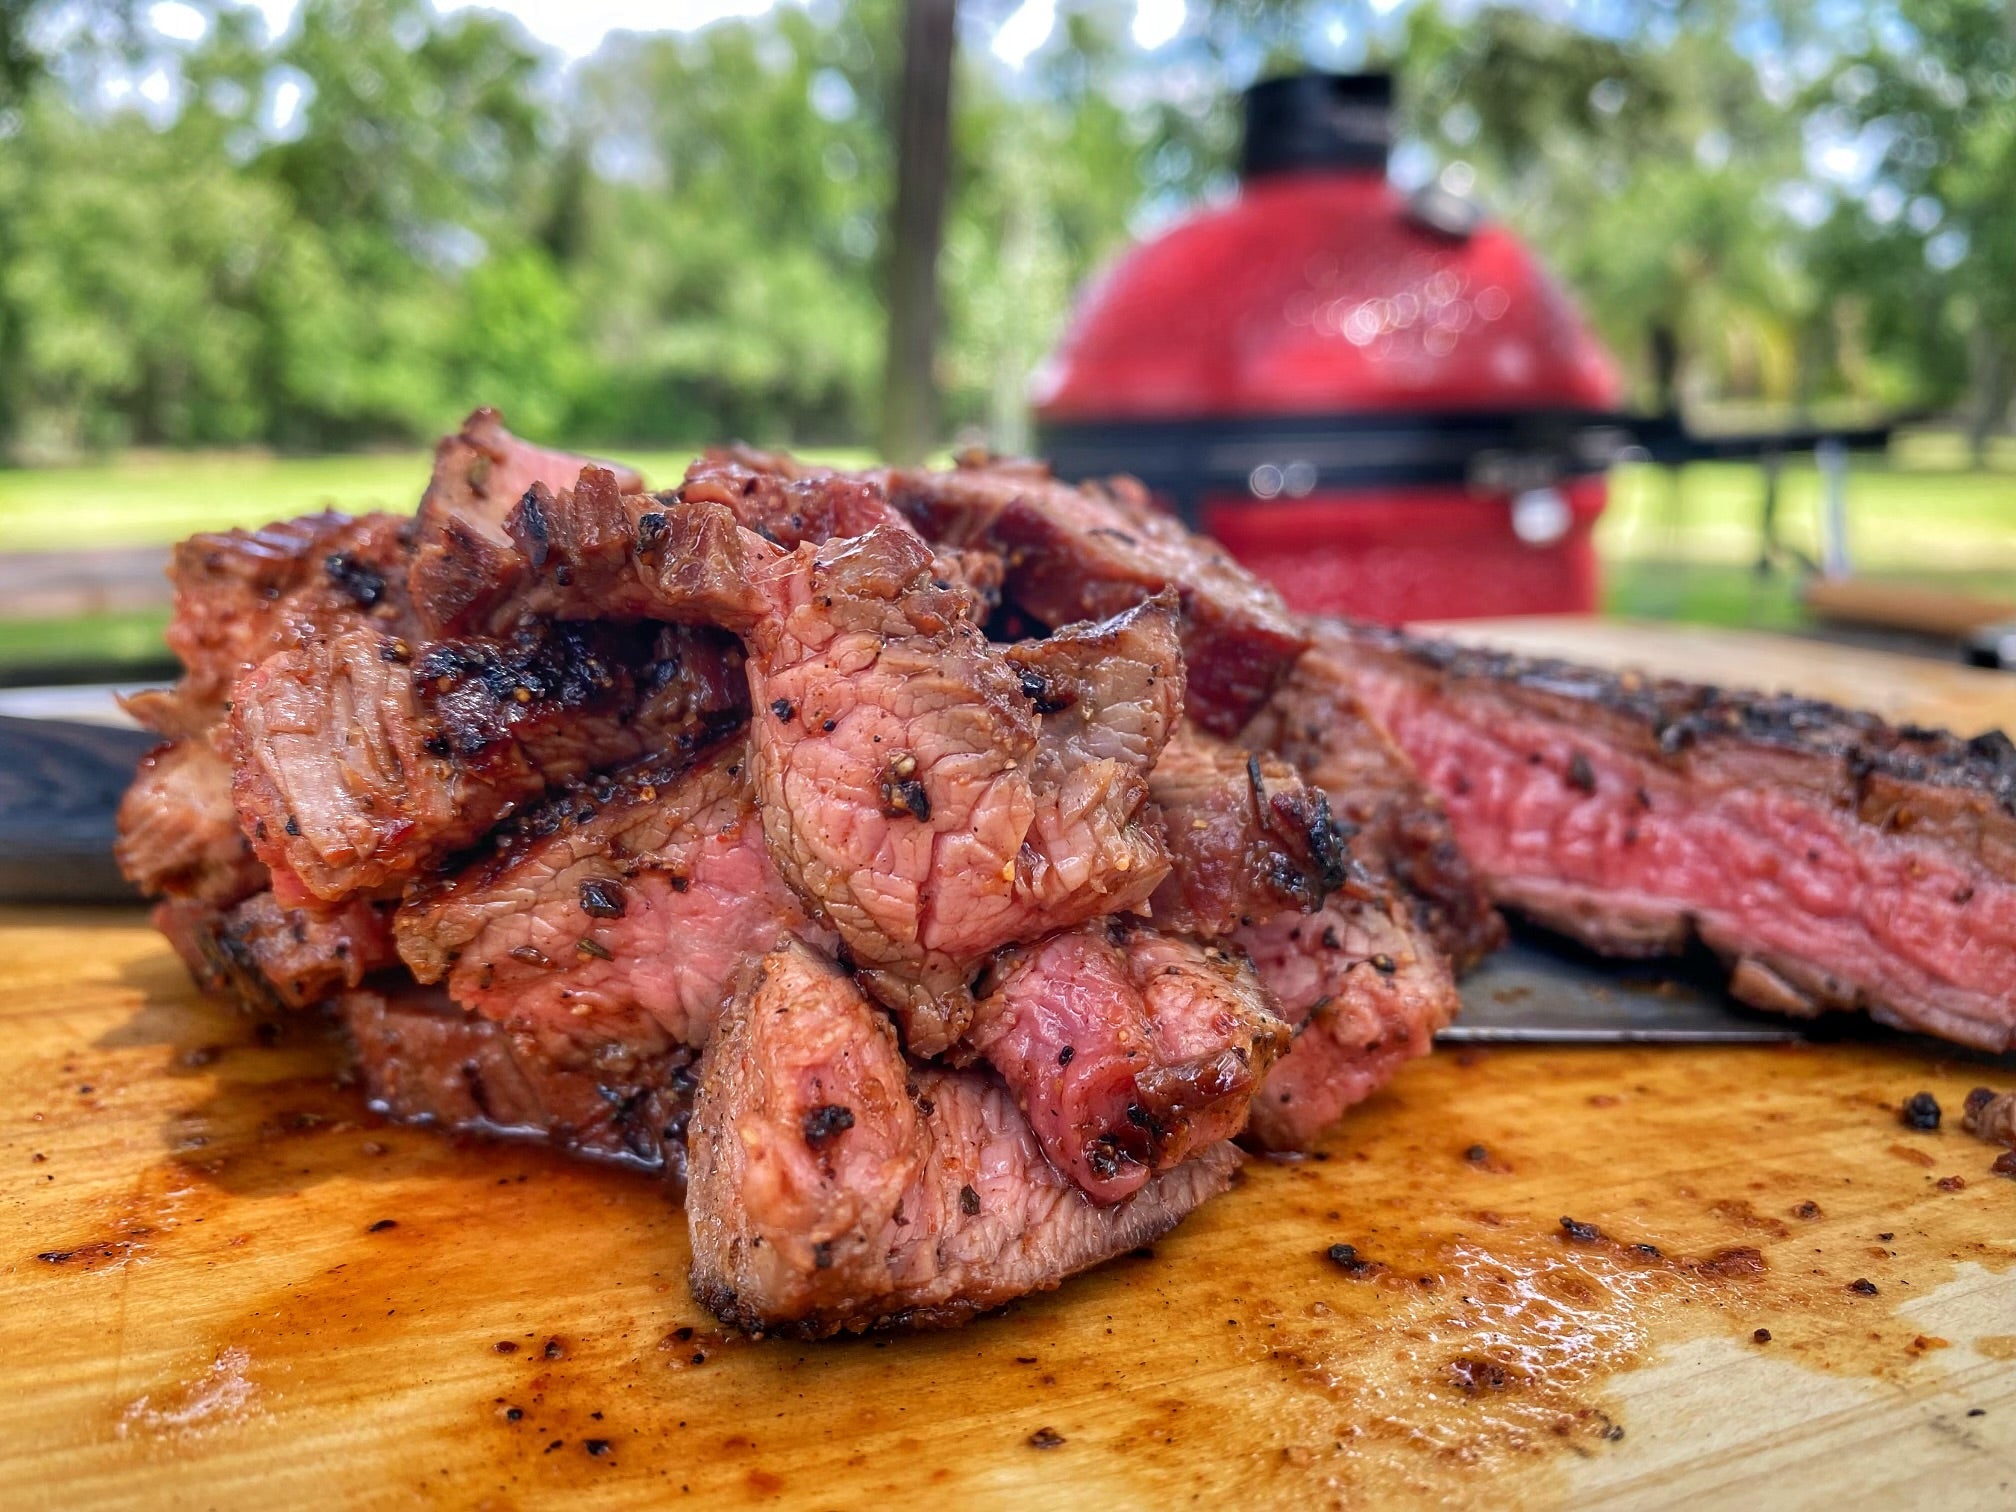 All About Flank Steak - Meat Recipes and Cooking Info